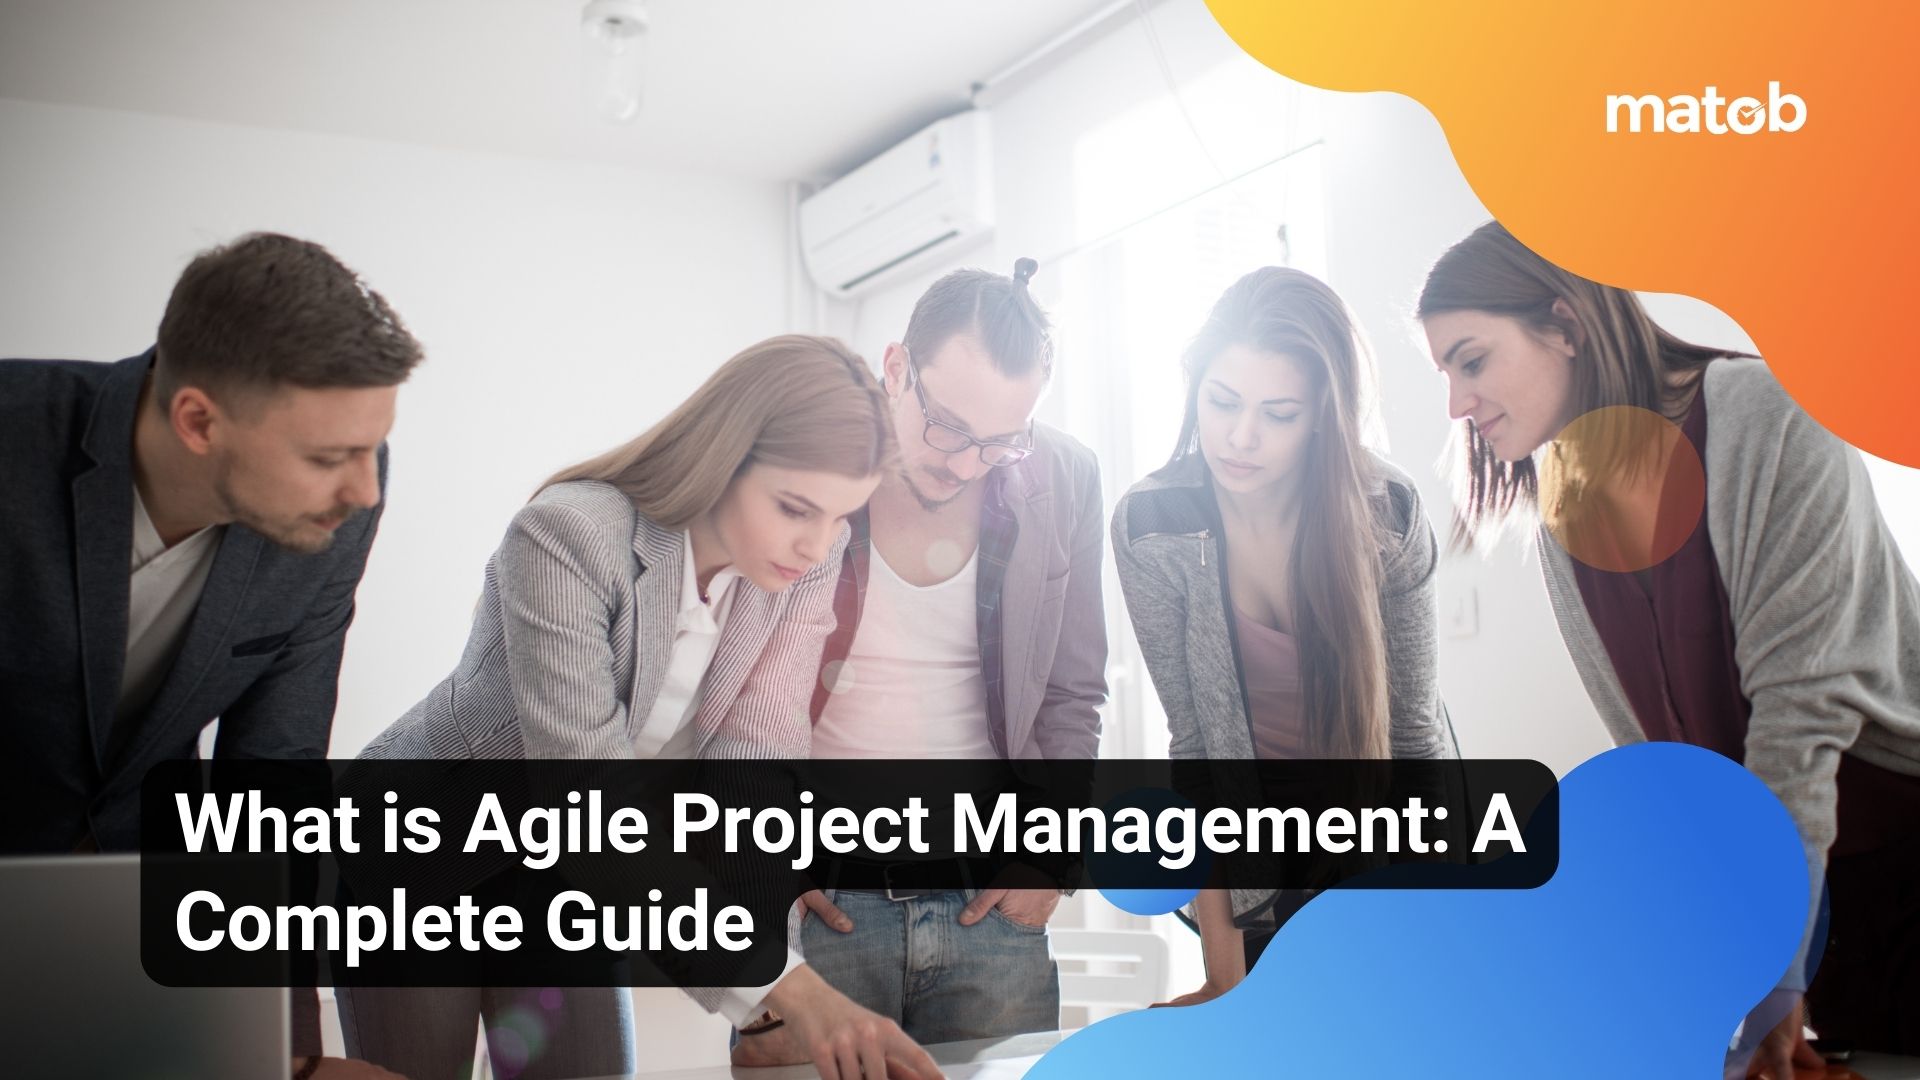 What is Agile Project Management: A Complete Guide